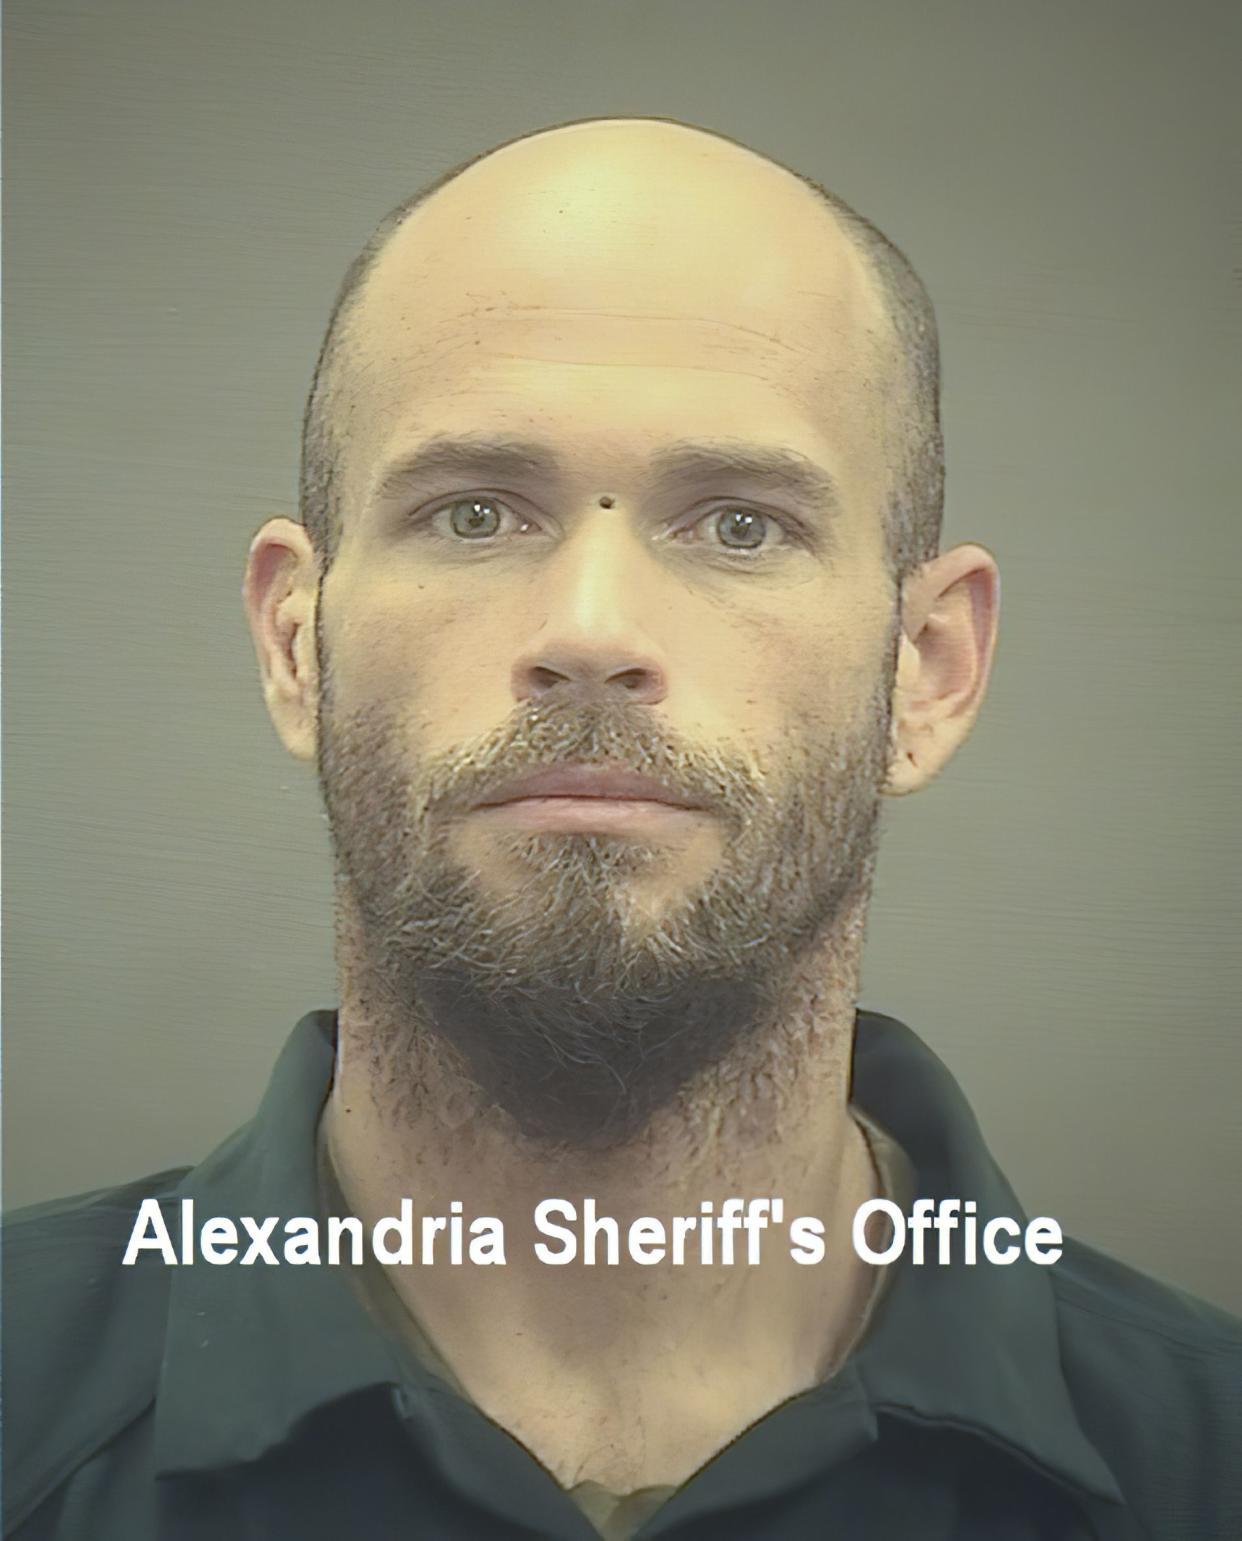 This image provided by The Alexandria (Va.) Sheriff's Office shows Jacob Chansley. A judge ordered corrections authorities to provide organic food to the Arizona man who is accused of participating in the insurrection at the U.S. Capitol while sporting face paint, no shirt and a furry hat with horns. He was moved from the Washington jail to the Virginia facility. 